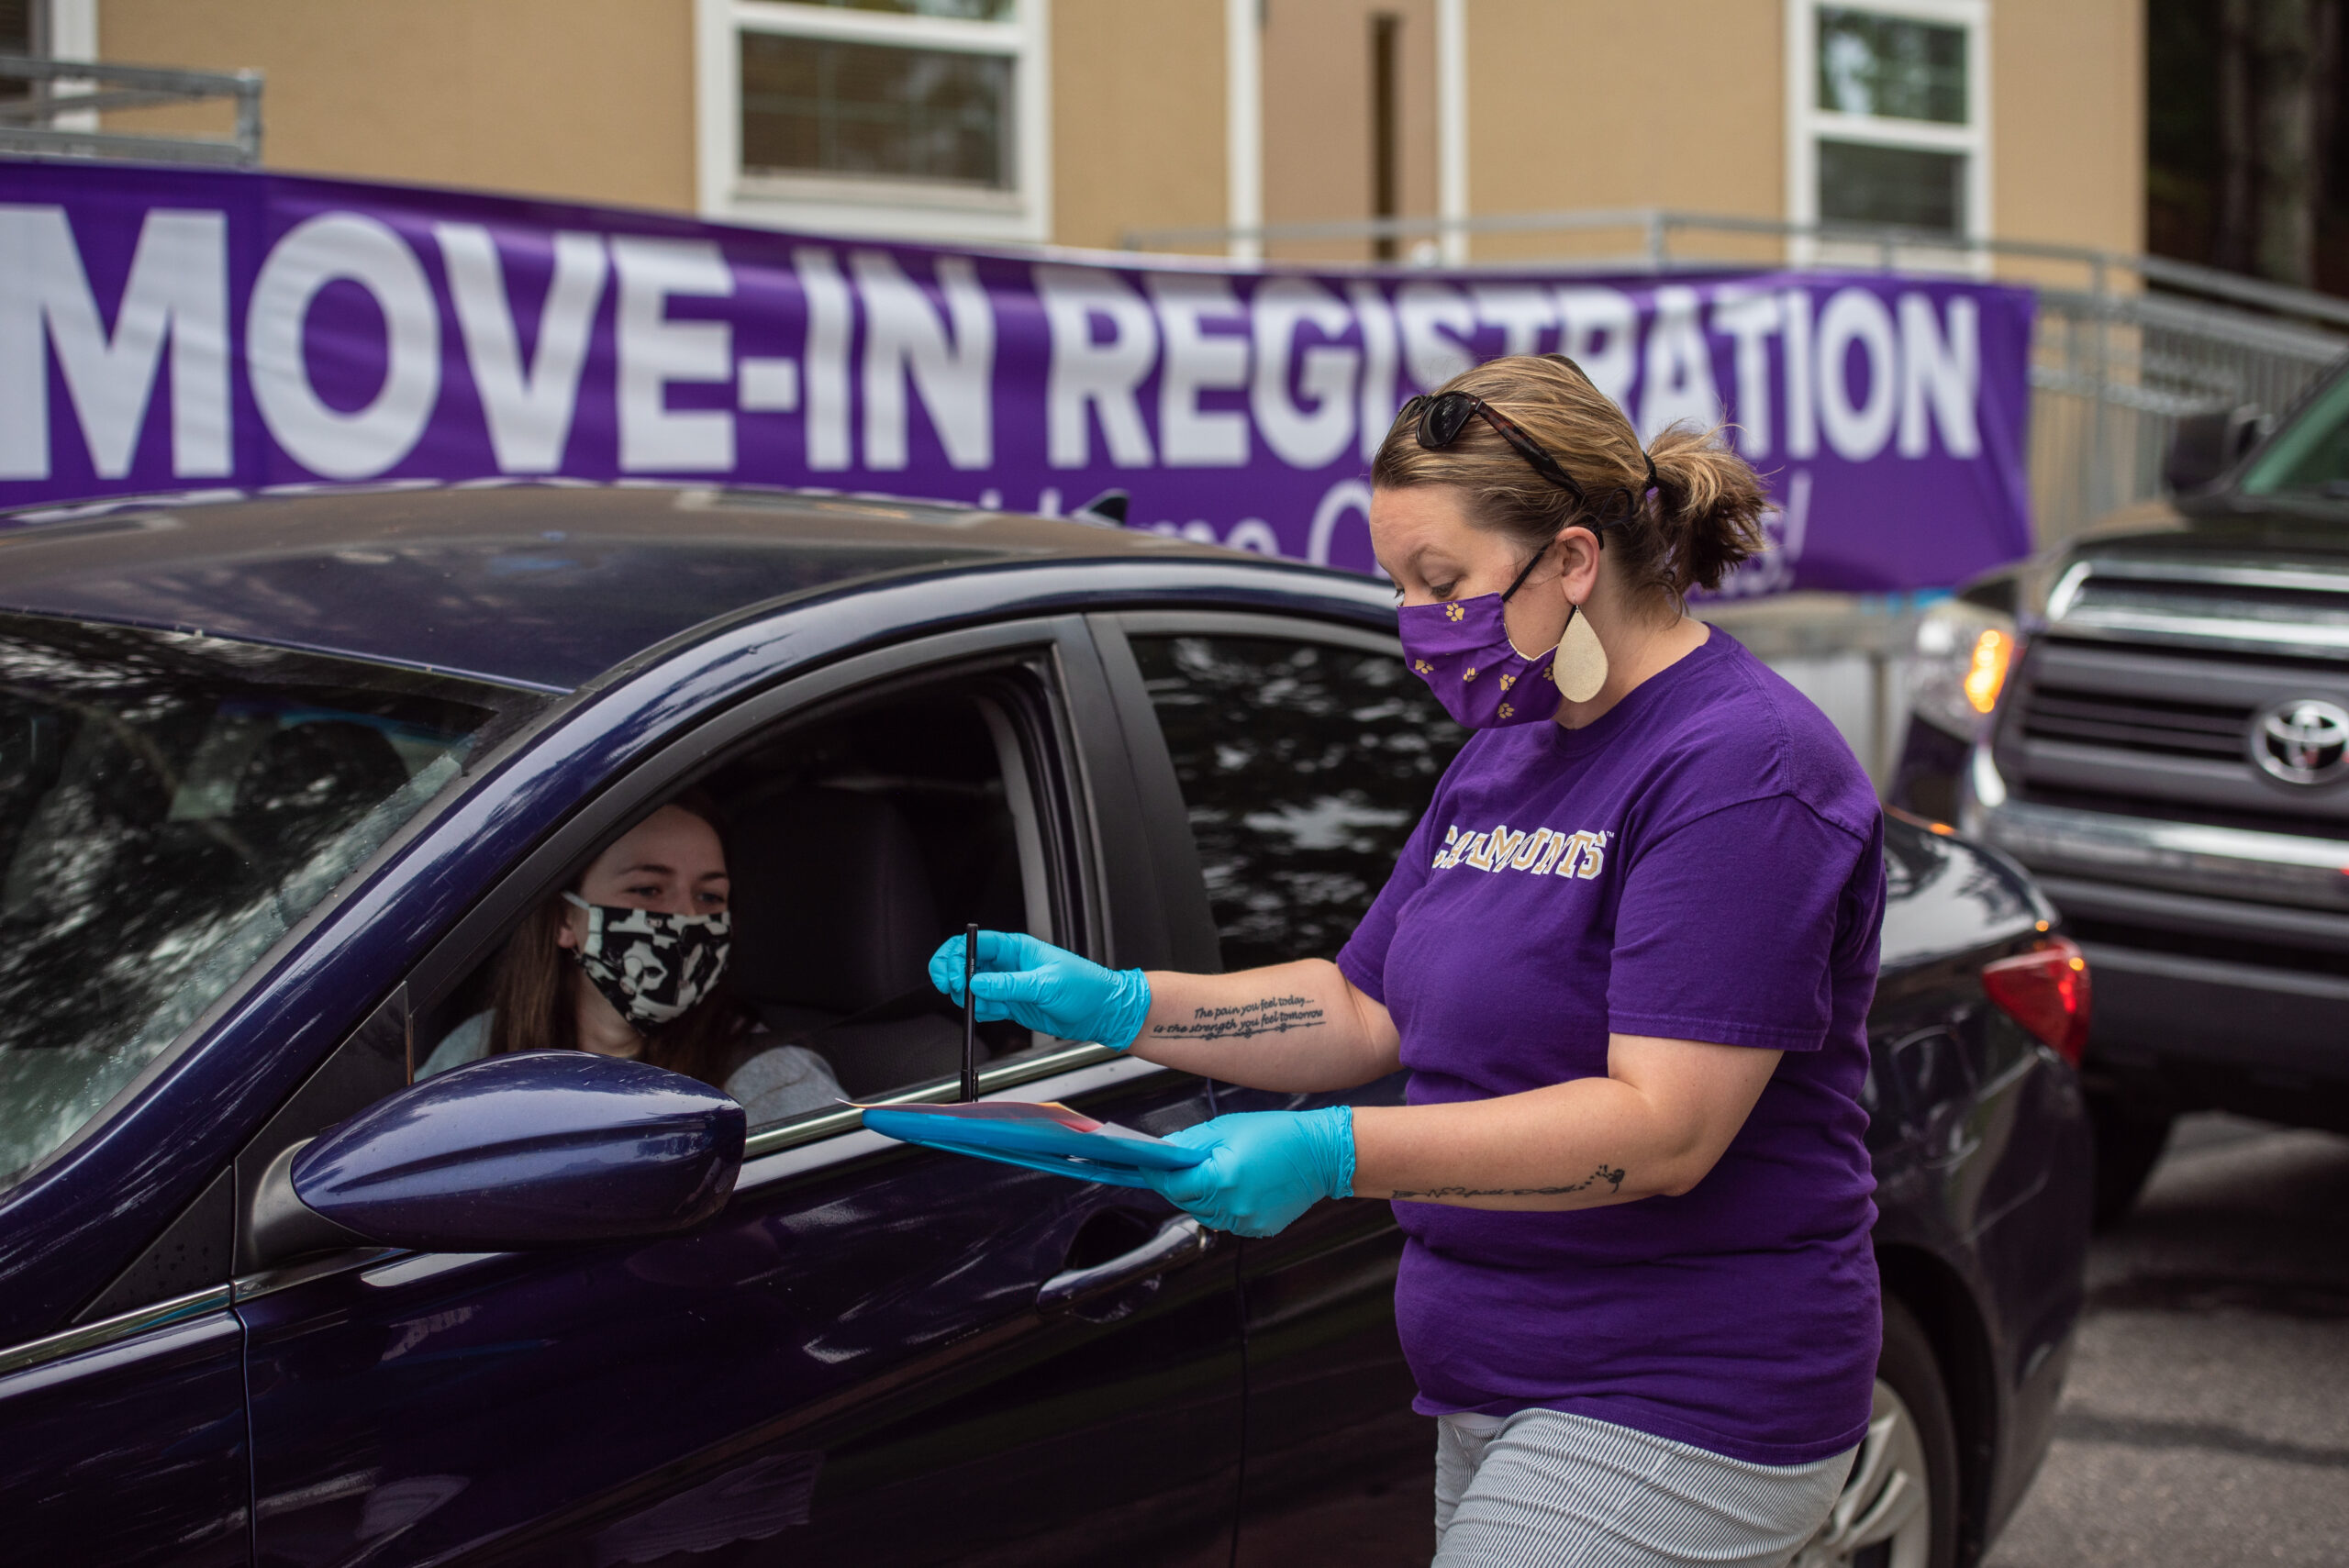 Fall semester at WCU to get underway with care, caution in place The